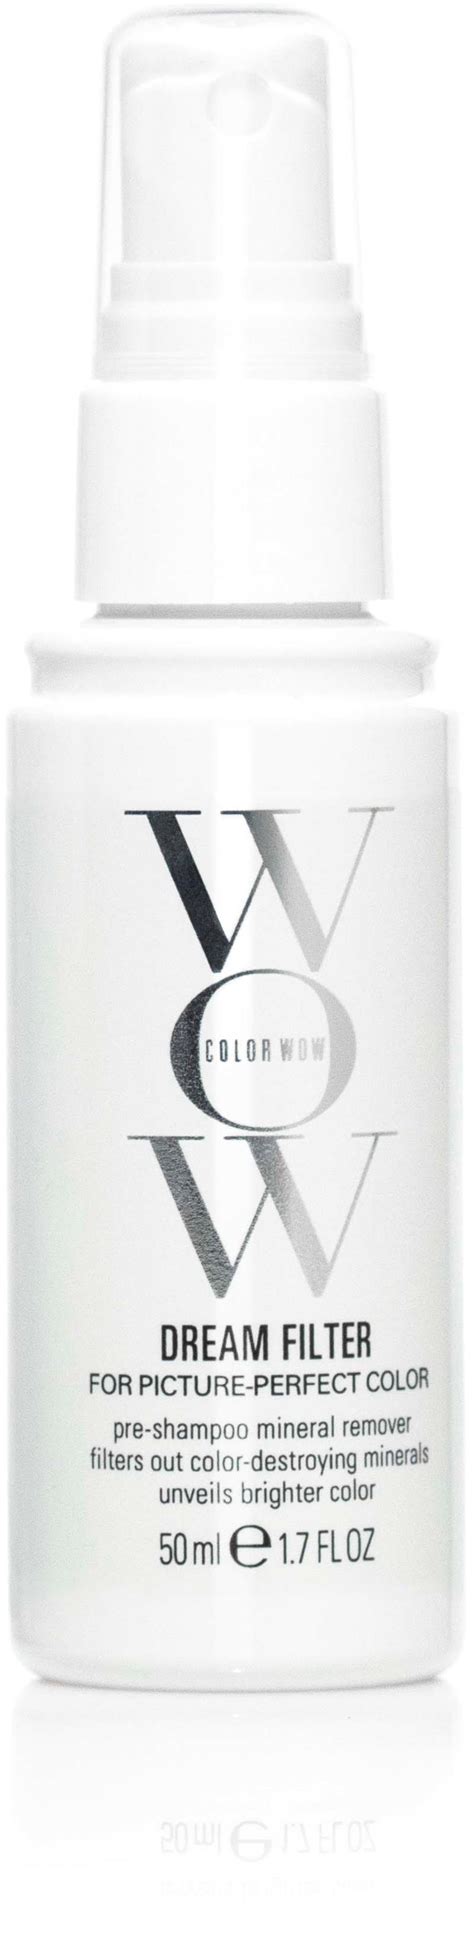 Color Wow Travel Dream Filter 50 Ml